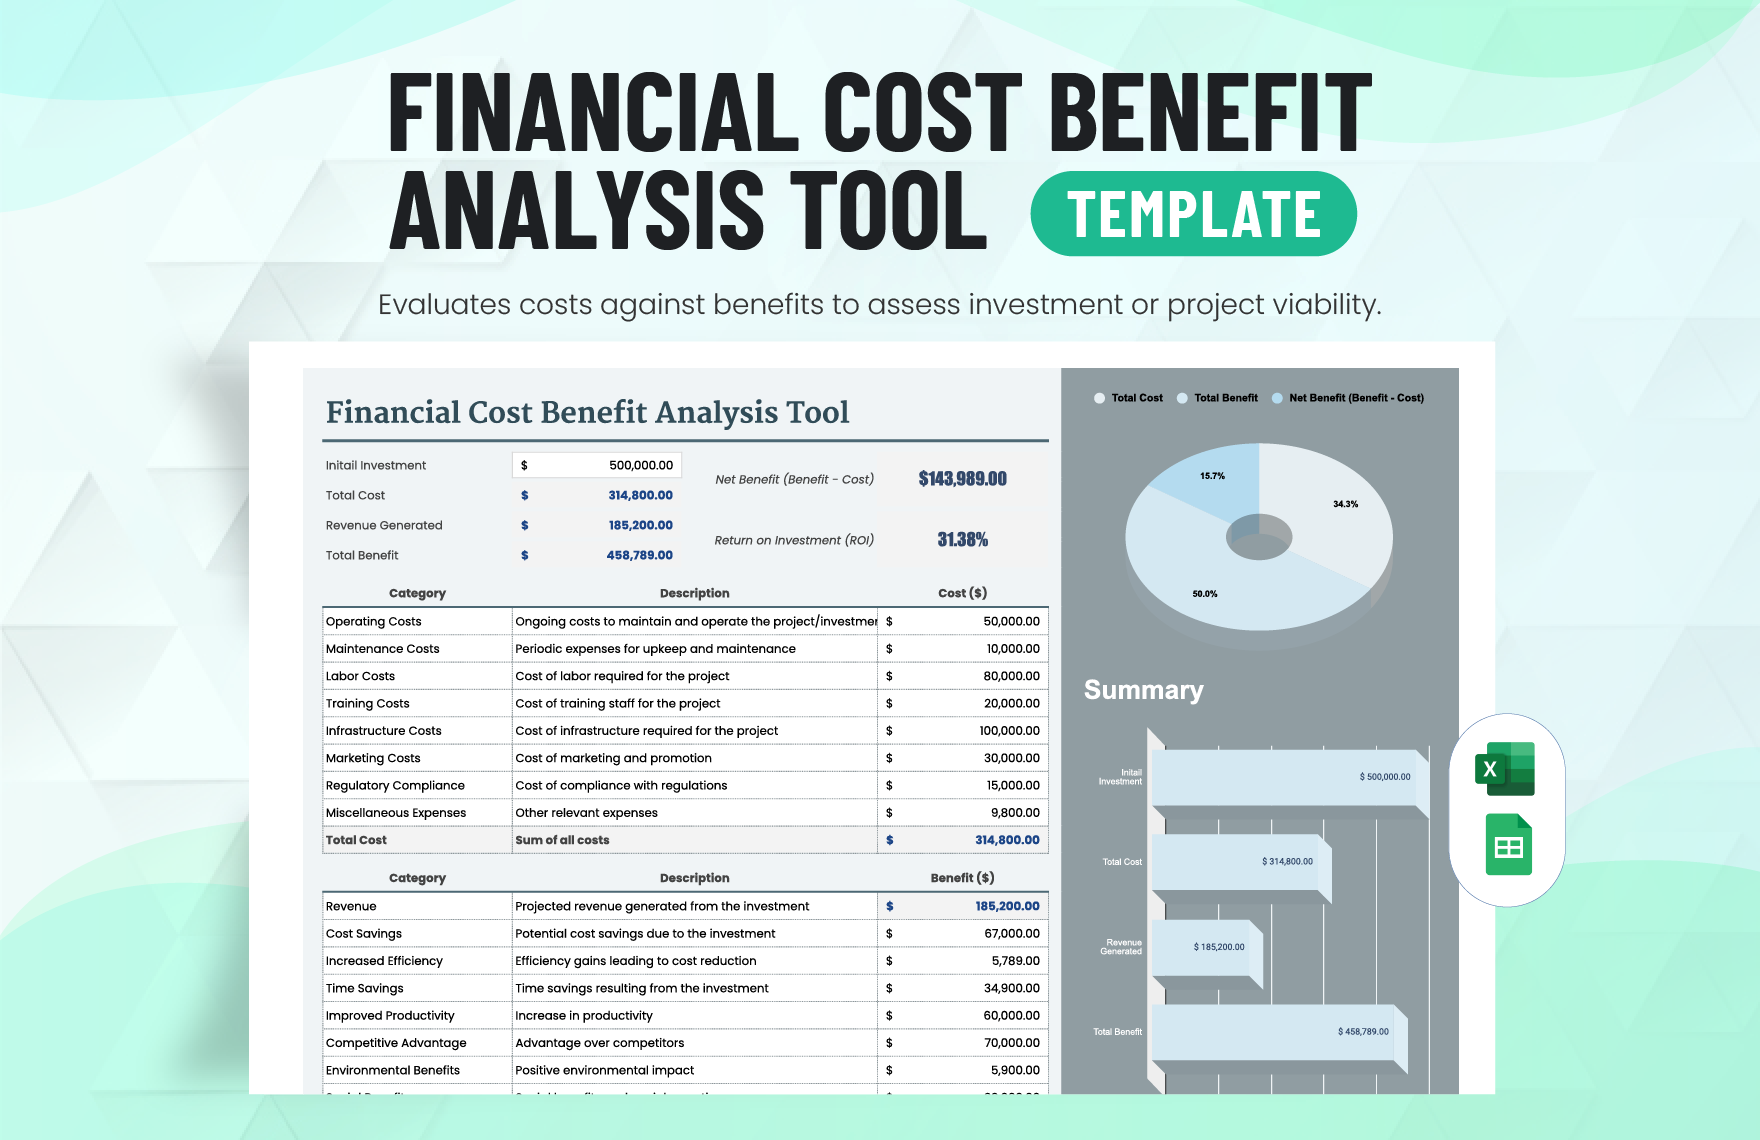 Financial Cost Benefit Analysis Tool Template in Excel, Google Sheets